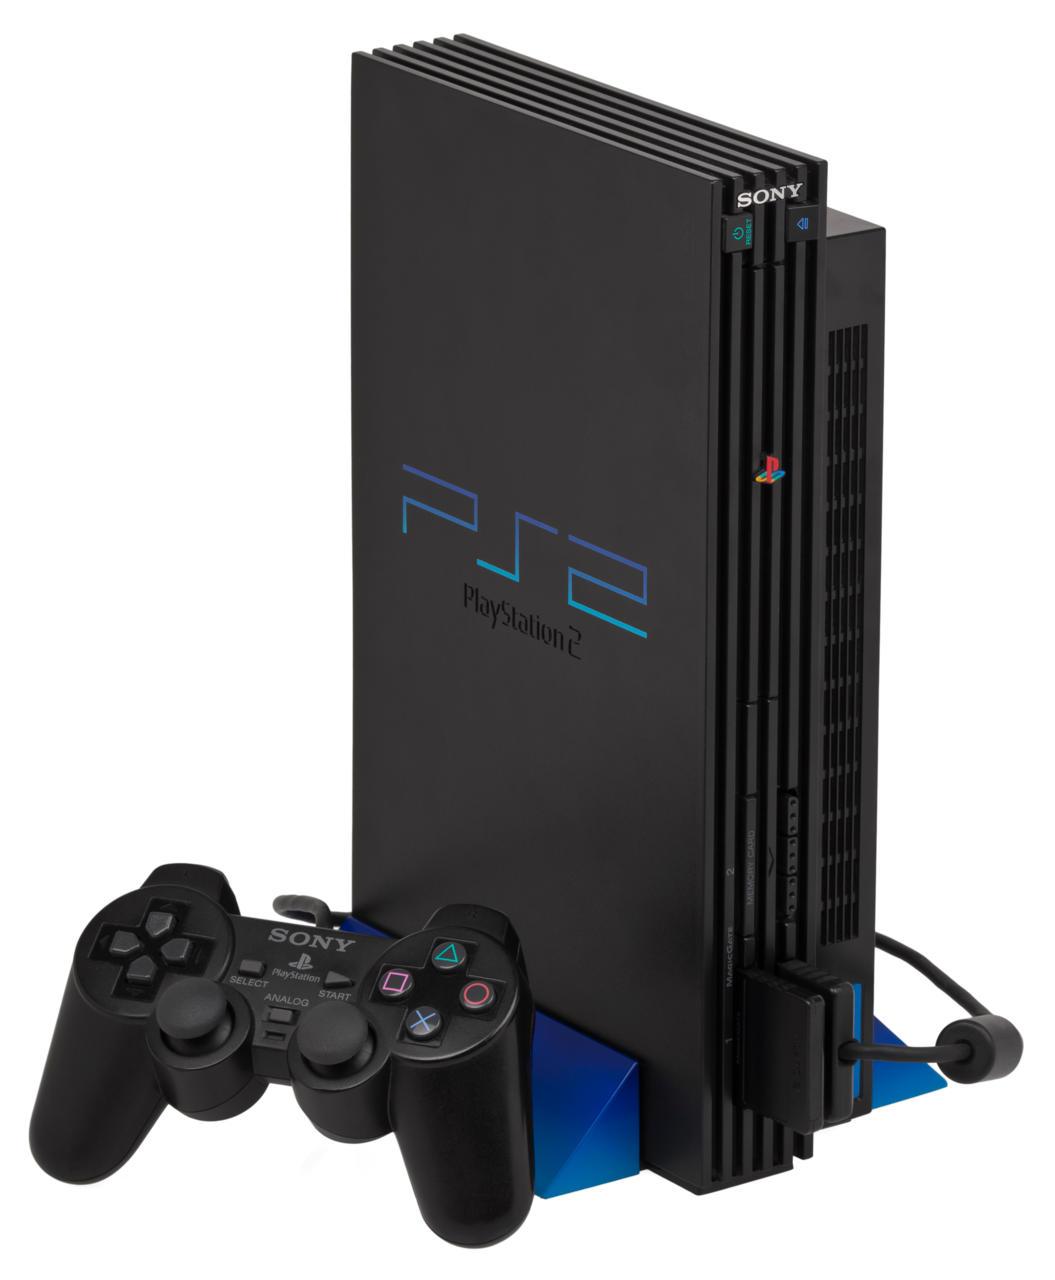 when will the playstation 6 come out